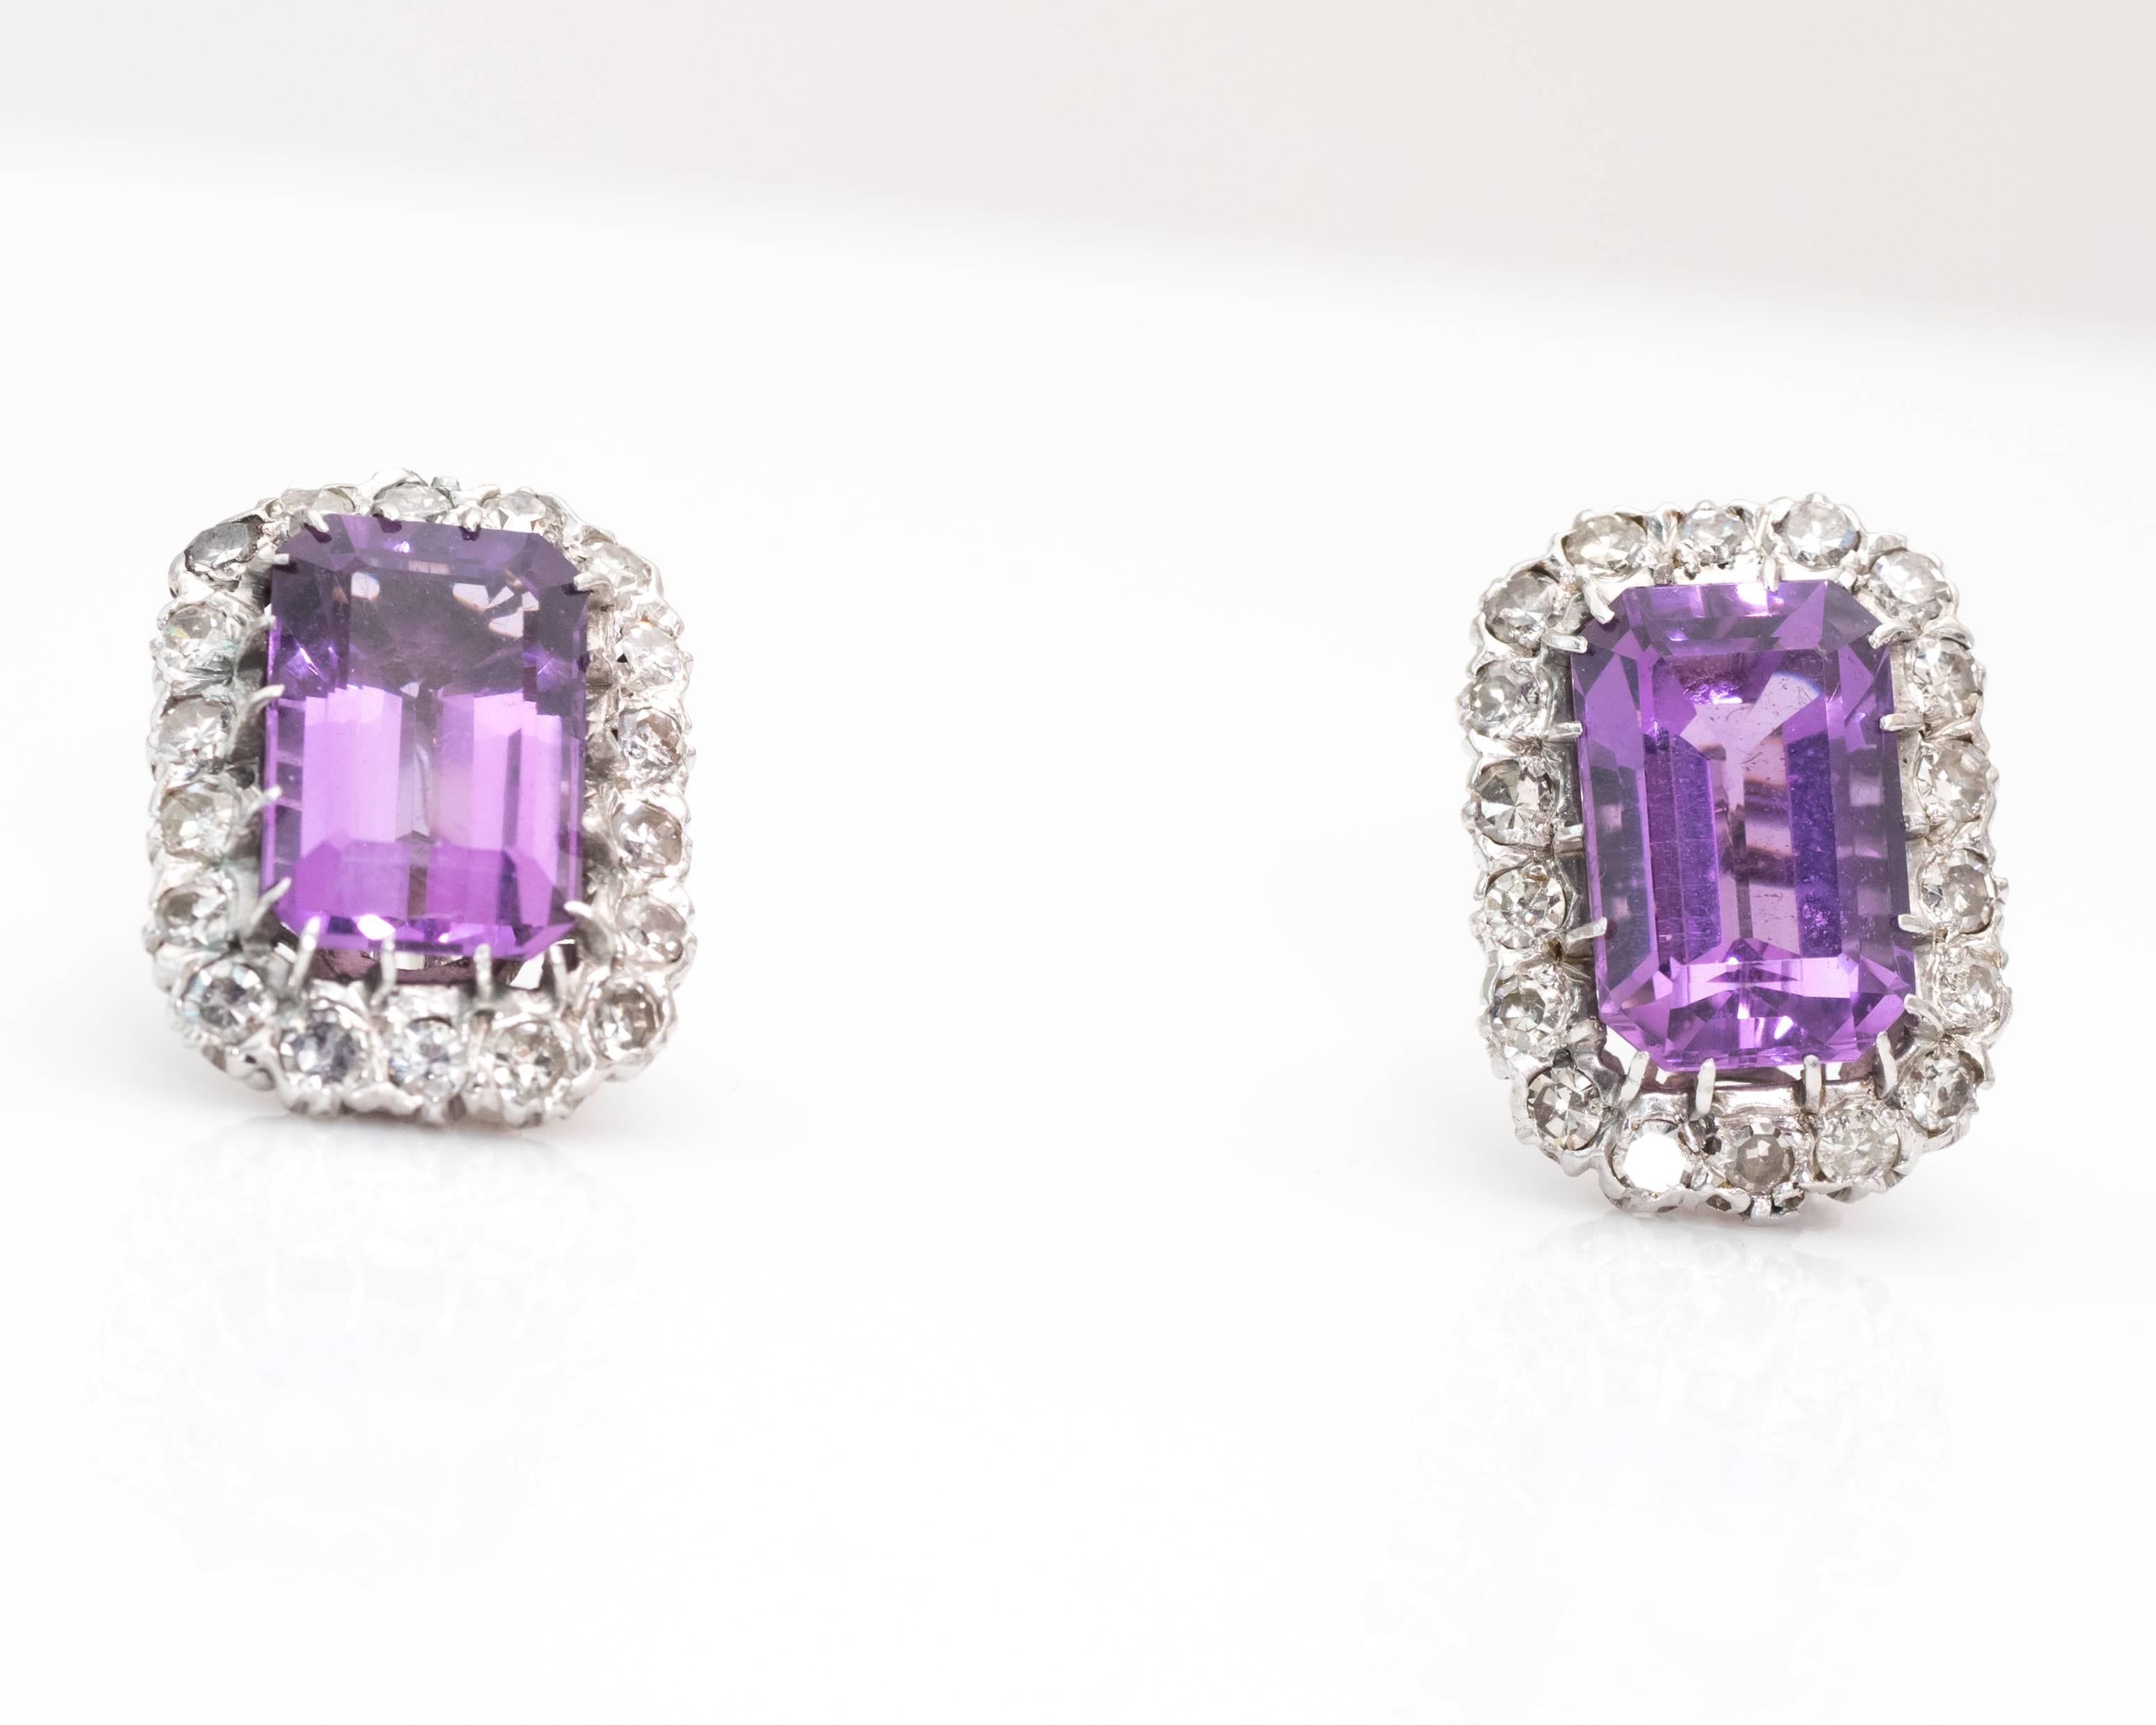 These timeless 1930s era intense, vivid purple amethyst and diamond in 14 karat white gold earrings exude sophistication. They feature an Omega back for added stability and security. 

Earring Details:
Metal: 14 karat white gold

Amethyst